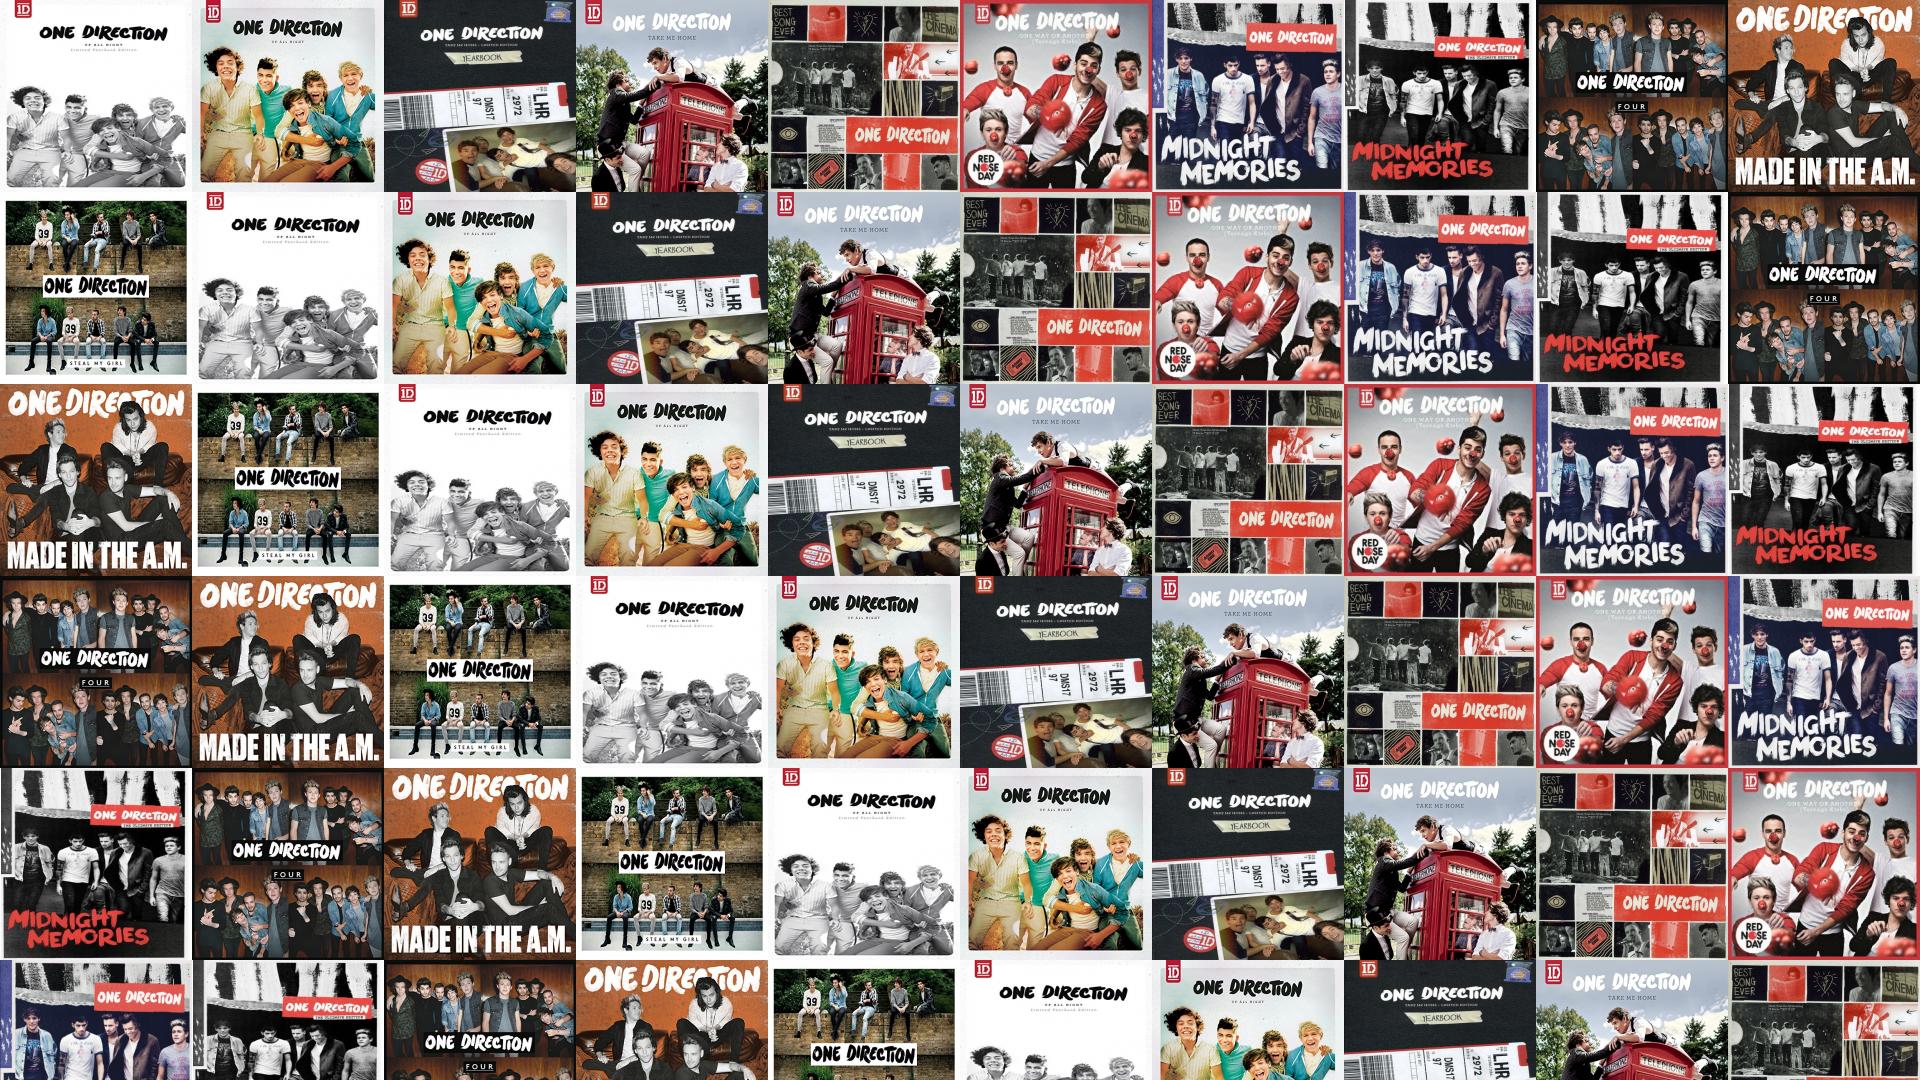 One Direction Albums Collage